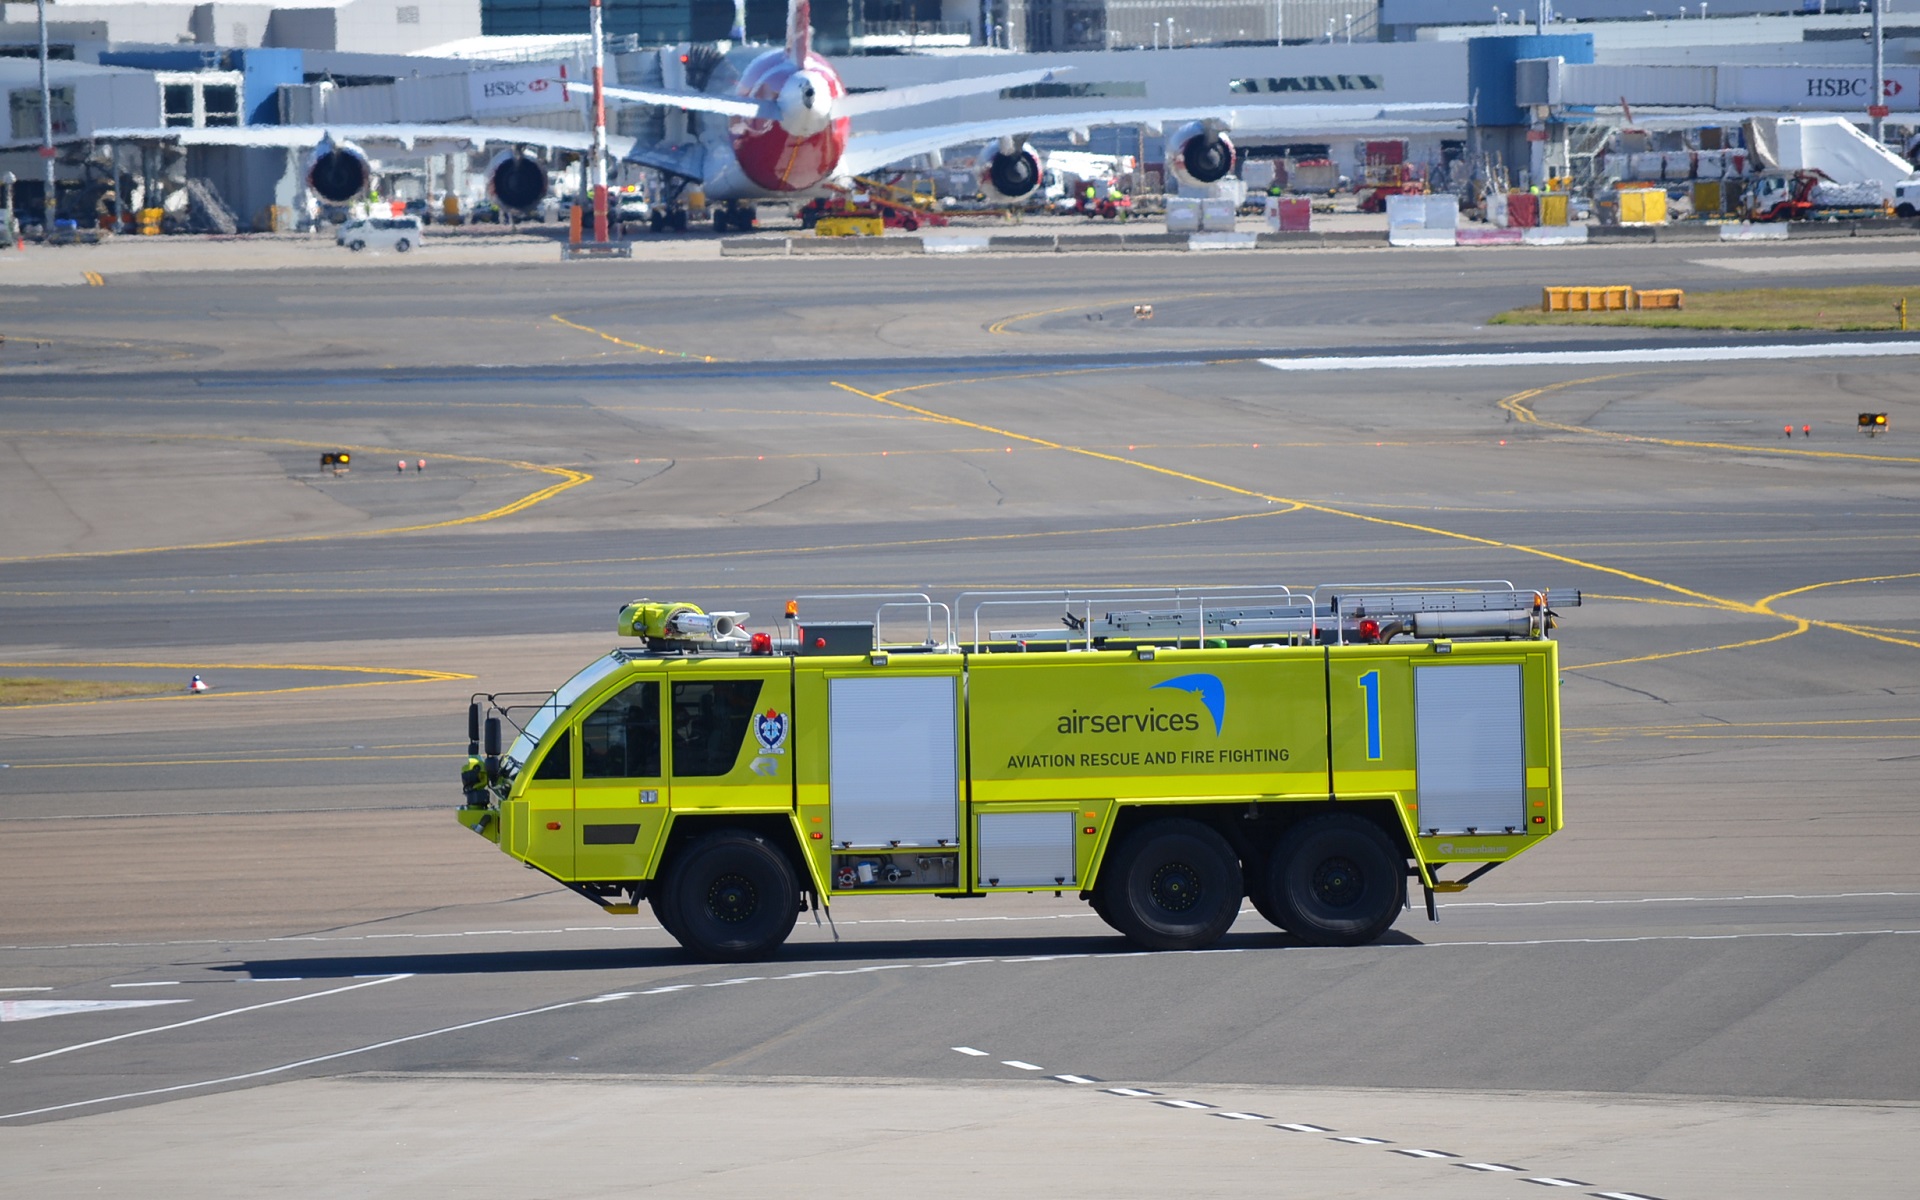 Airservices aviation rescue and fire fighting truck at Sydney Airport Australia by lonewolf6738